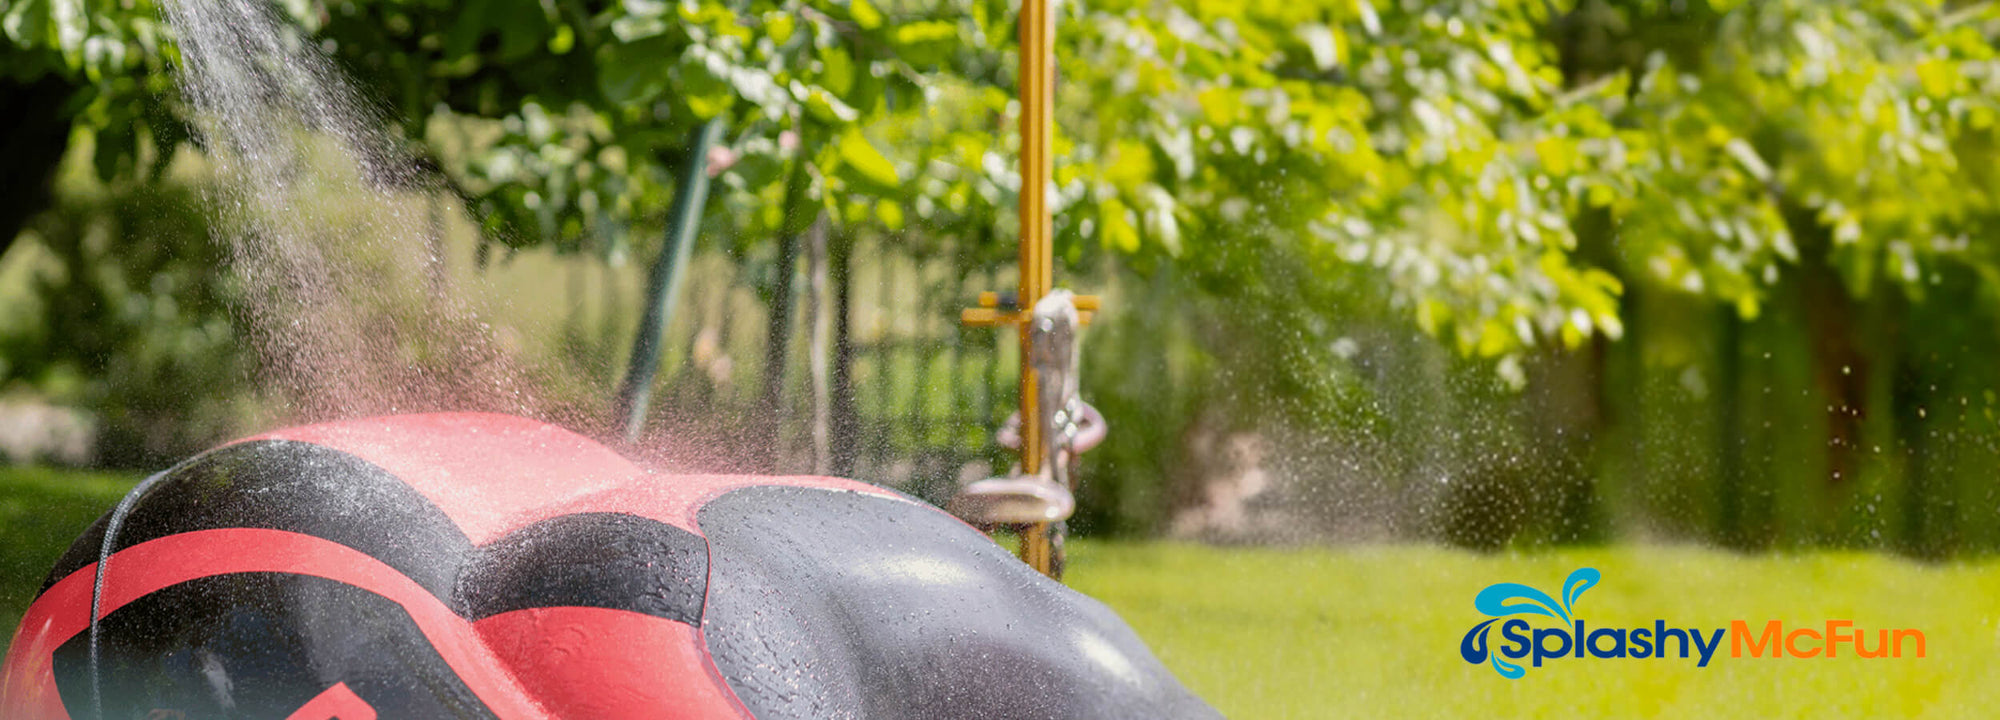 A Step-By-Step Inflatable Boat Care Routine. A red and black inflatable boat is shown being washed down by a hose. It is a closeup of the boat and we see green grass and trees in the background.